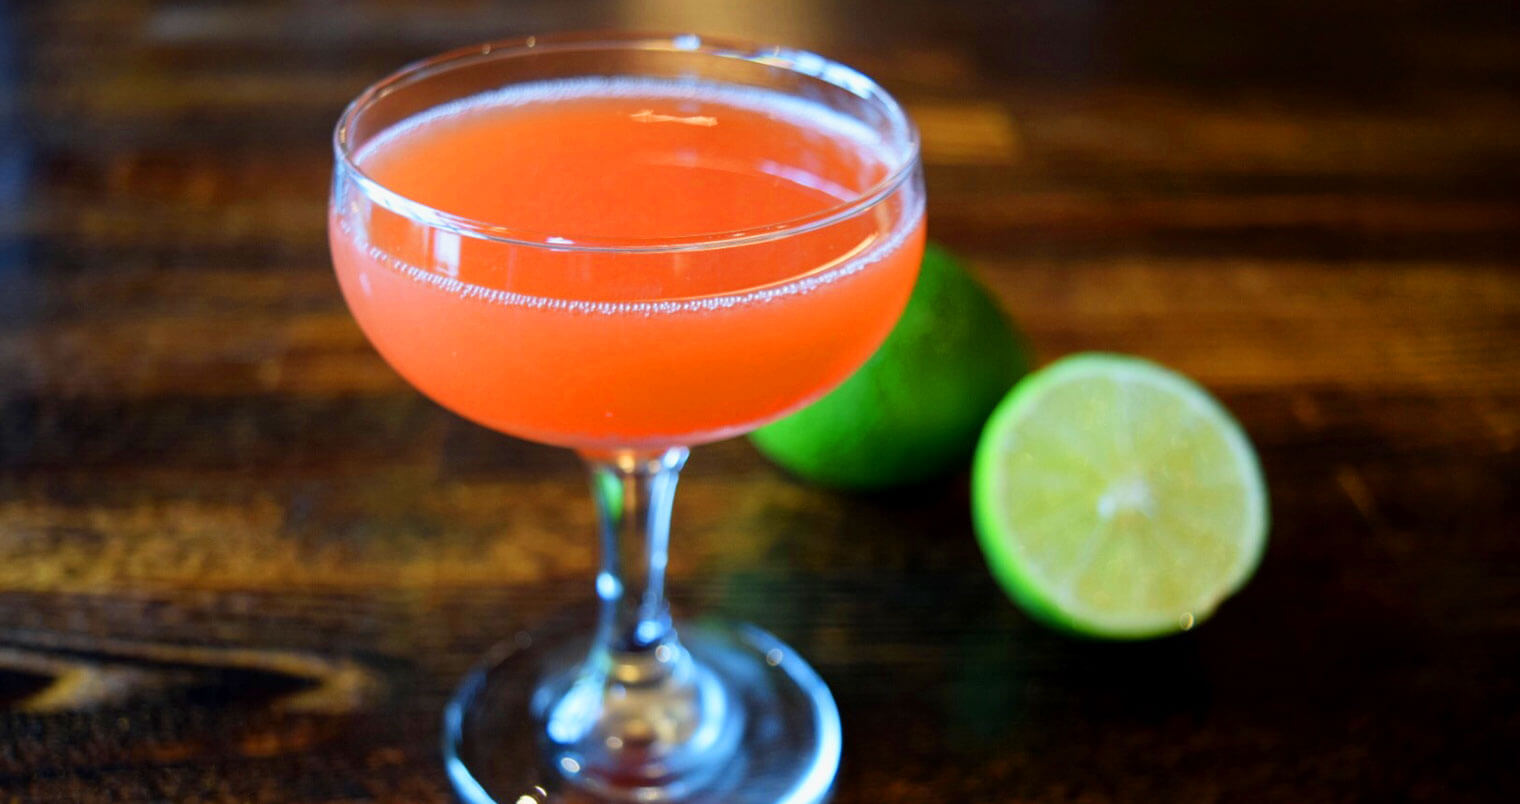 Anti-Valentine’s Day Cocktails, what's chilling right now, featured image